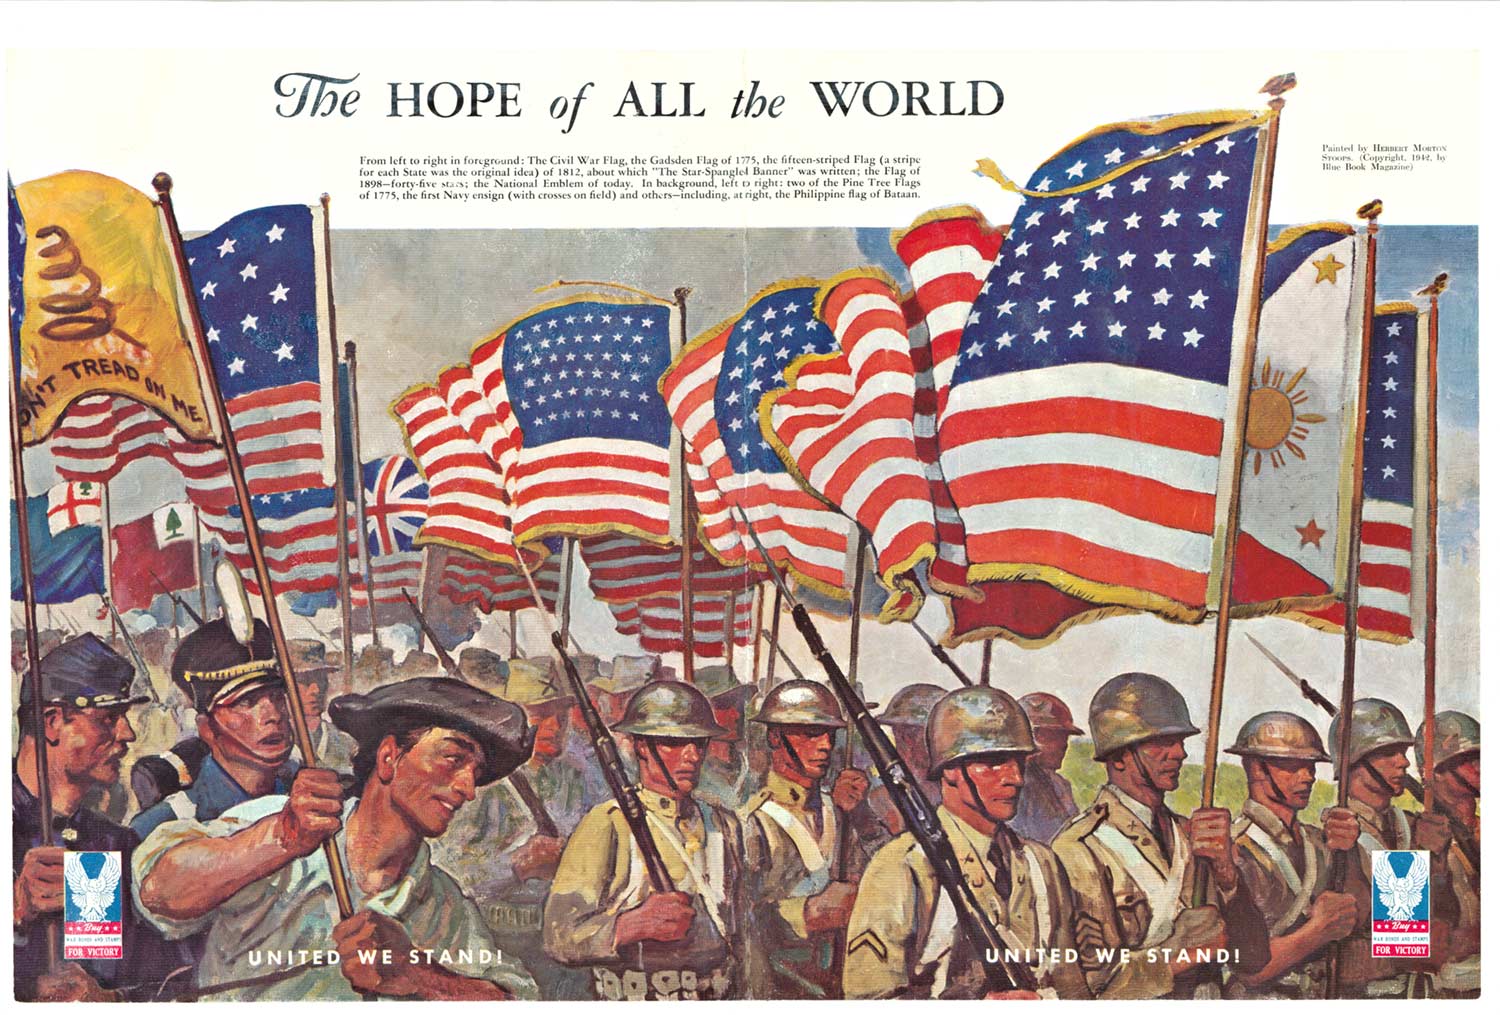 From the painting by Herbert Morton Stoops. U.S. soldiers from different eras carry flags: Don't Tread on Me, Civil War flag, fifteen striped flag of 1812, flag of 1898 with forty five stars, and the flag of the World War two era. "United We Stand!